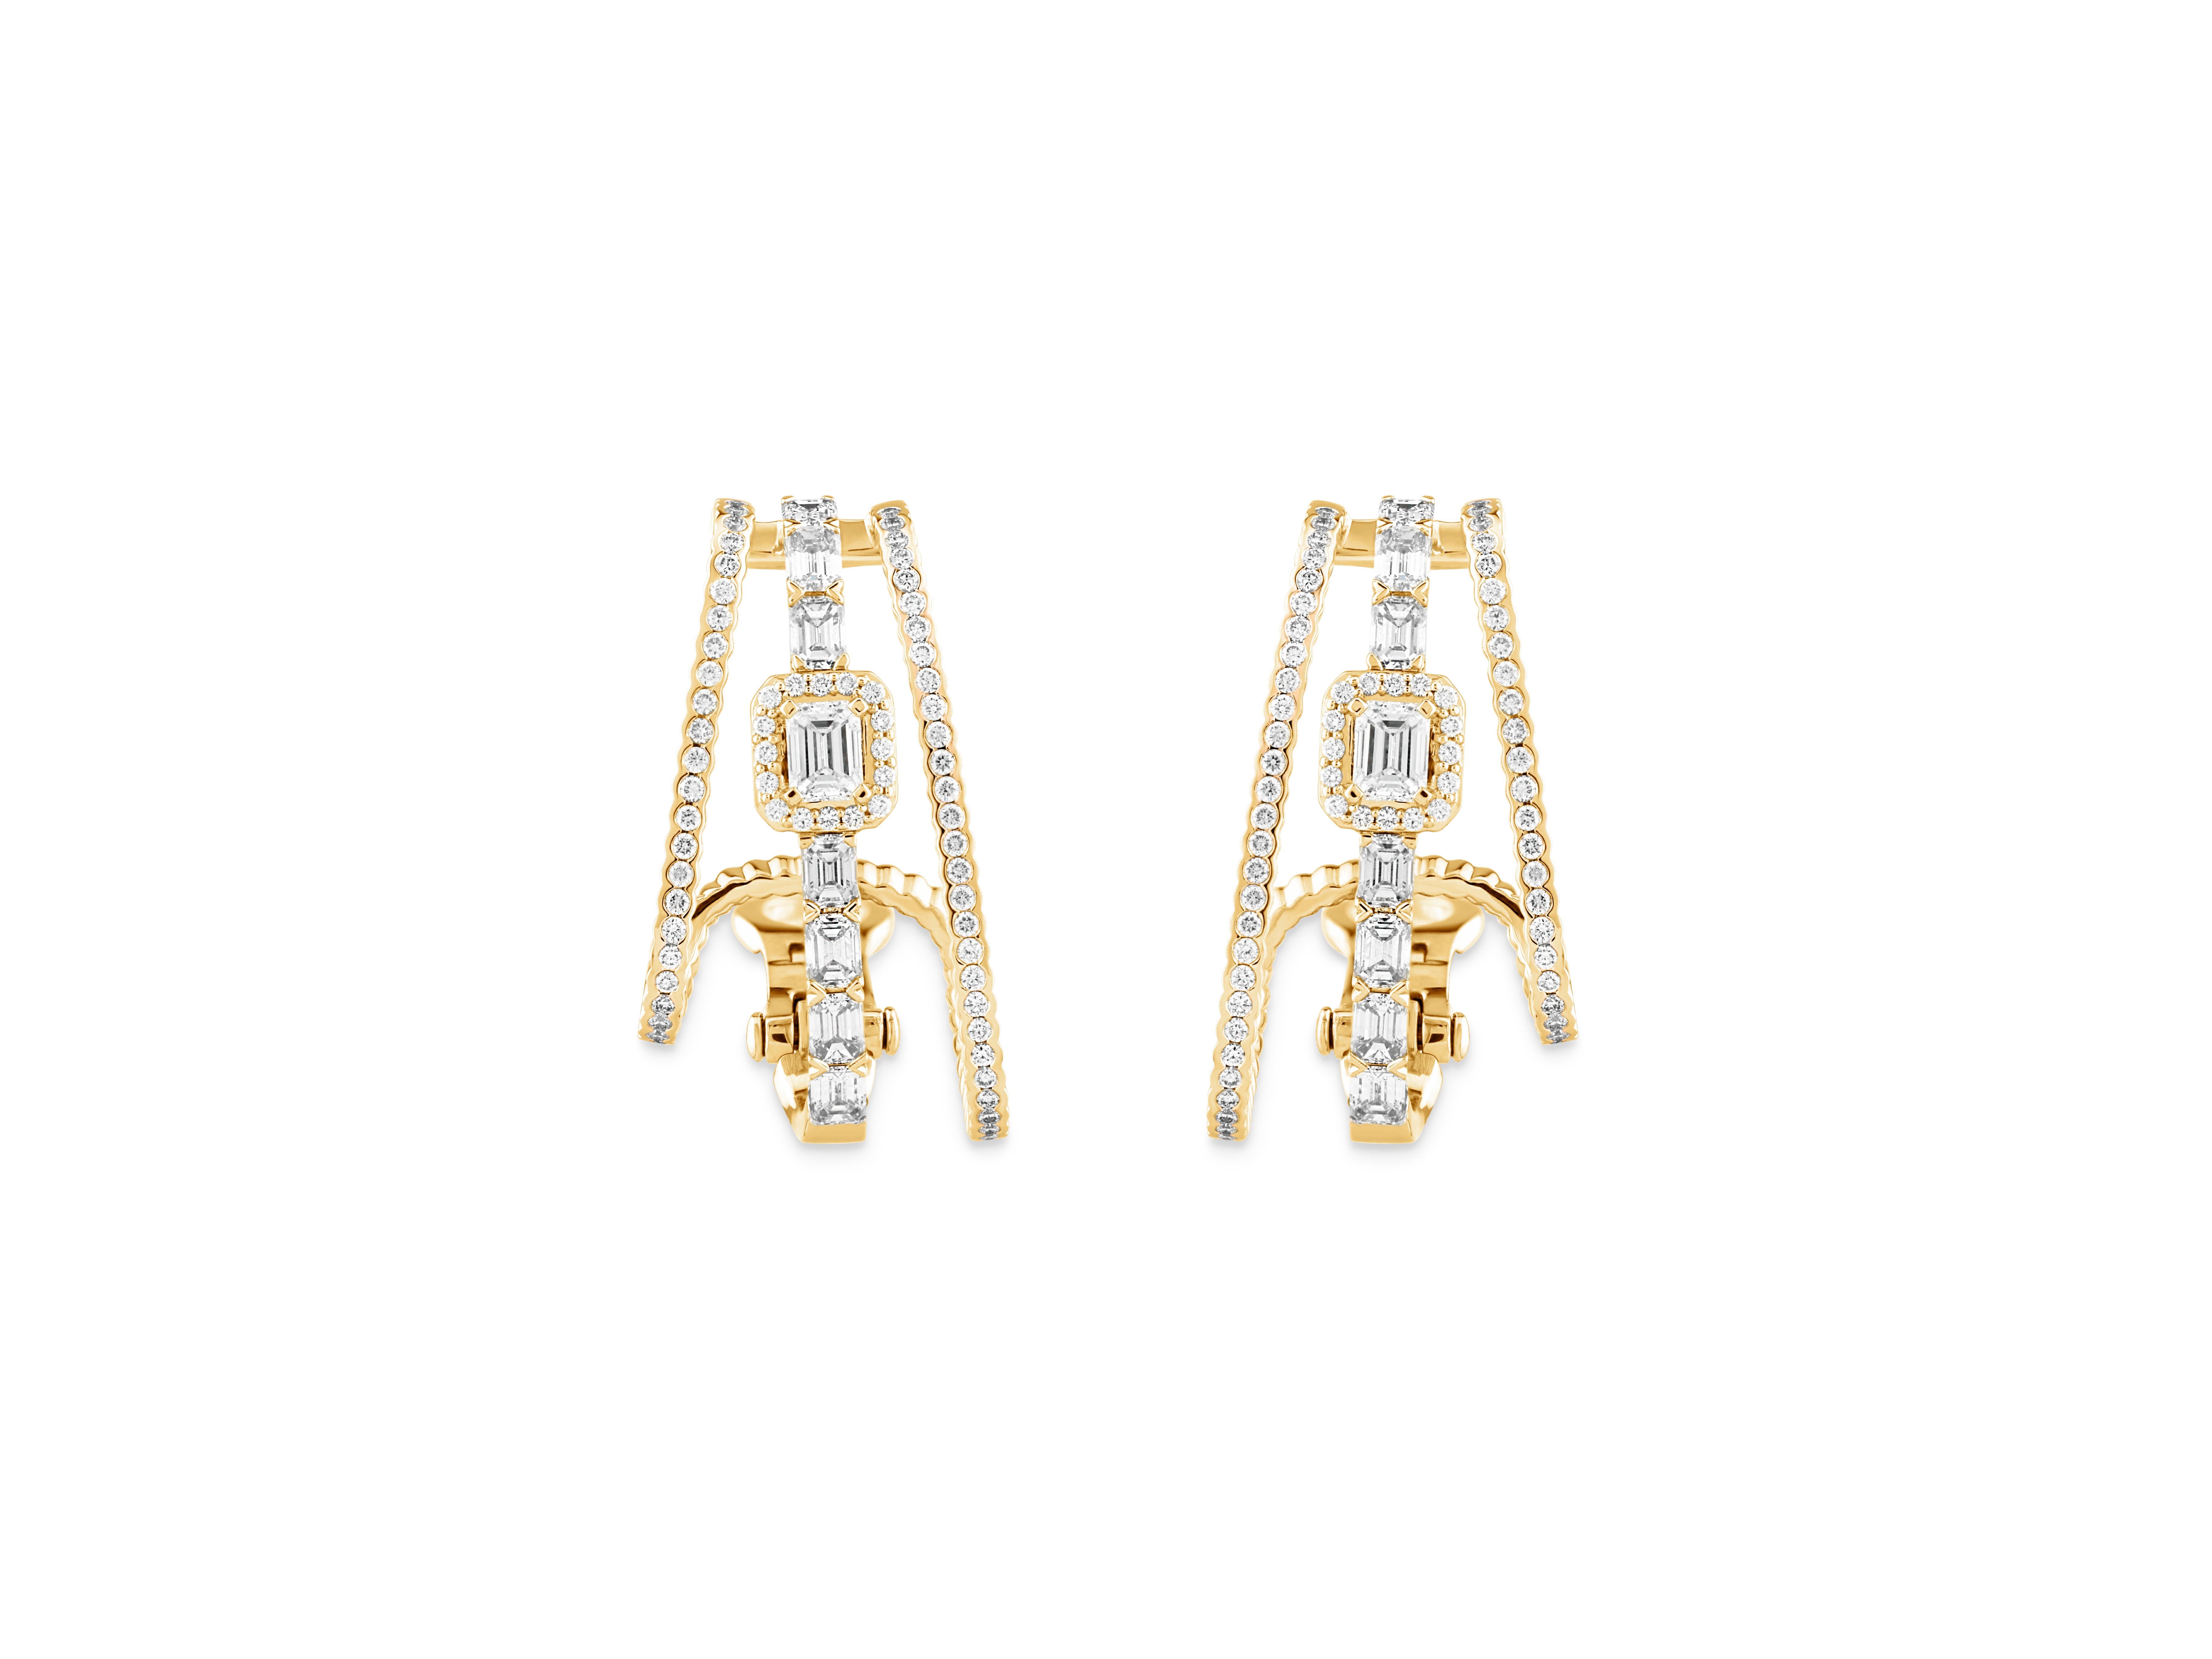 The FIFI Emerald Statement Earrings offer understated style elevated with a chic downtown flair. This collection is for the girl on the go who understands that even the simplest accents have a powerful impact. Available in 18K white, rose, and